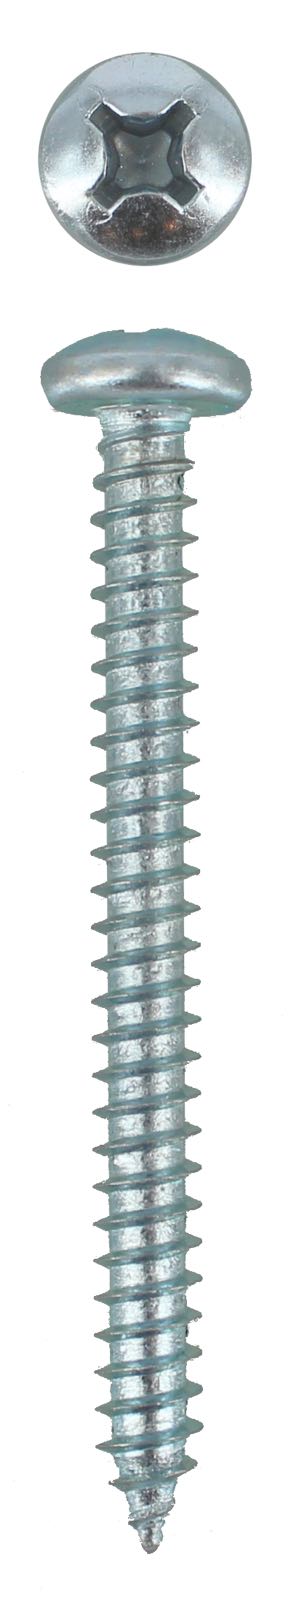 SELF TAPPING SCREW PAN PHILLIPS 10G X 2 (QTY 35)